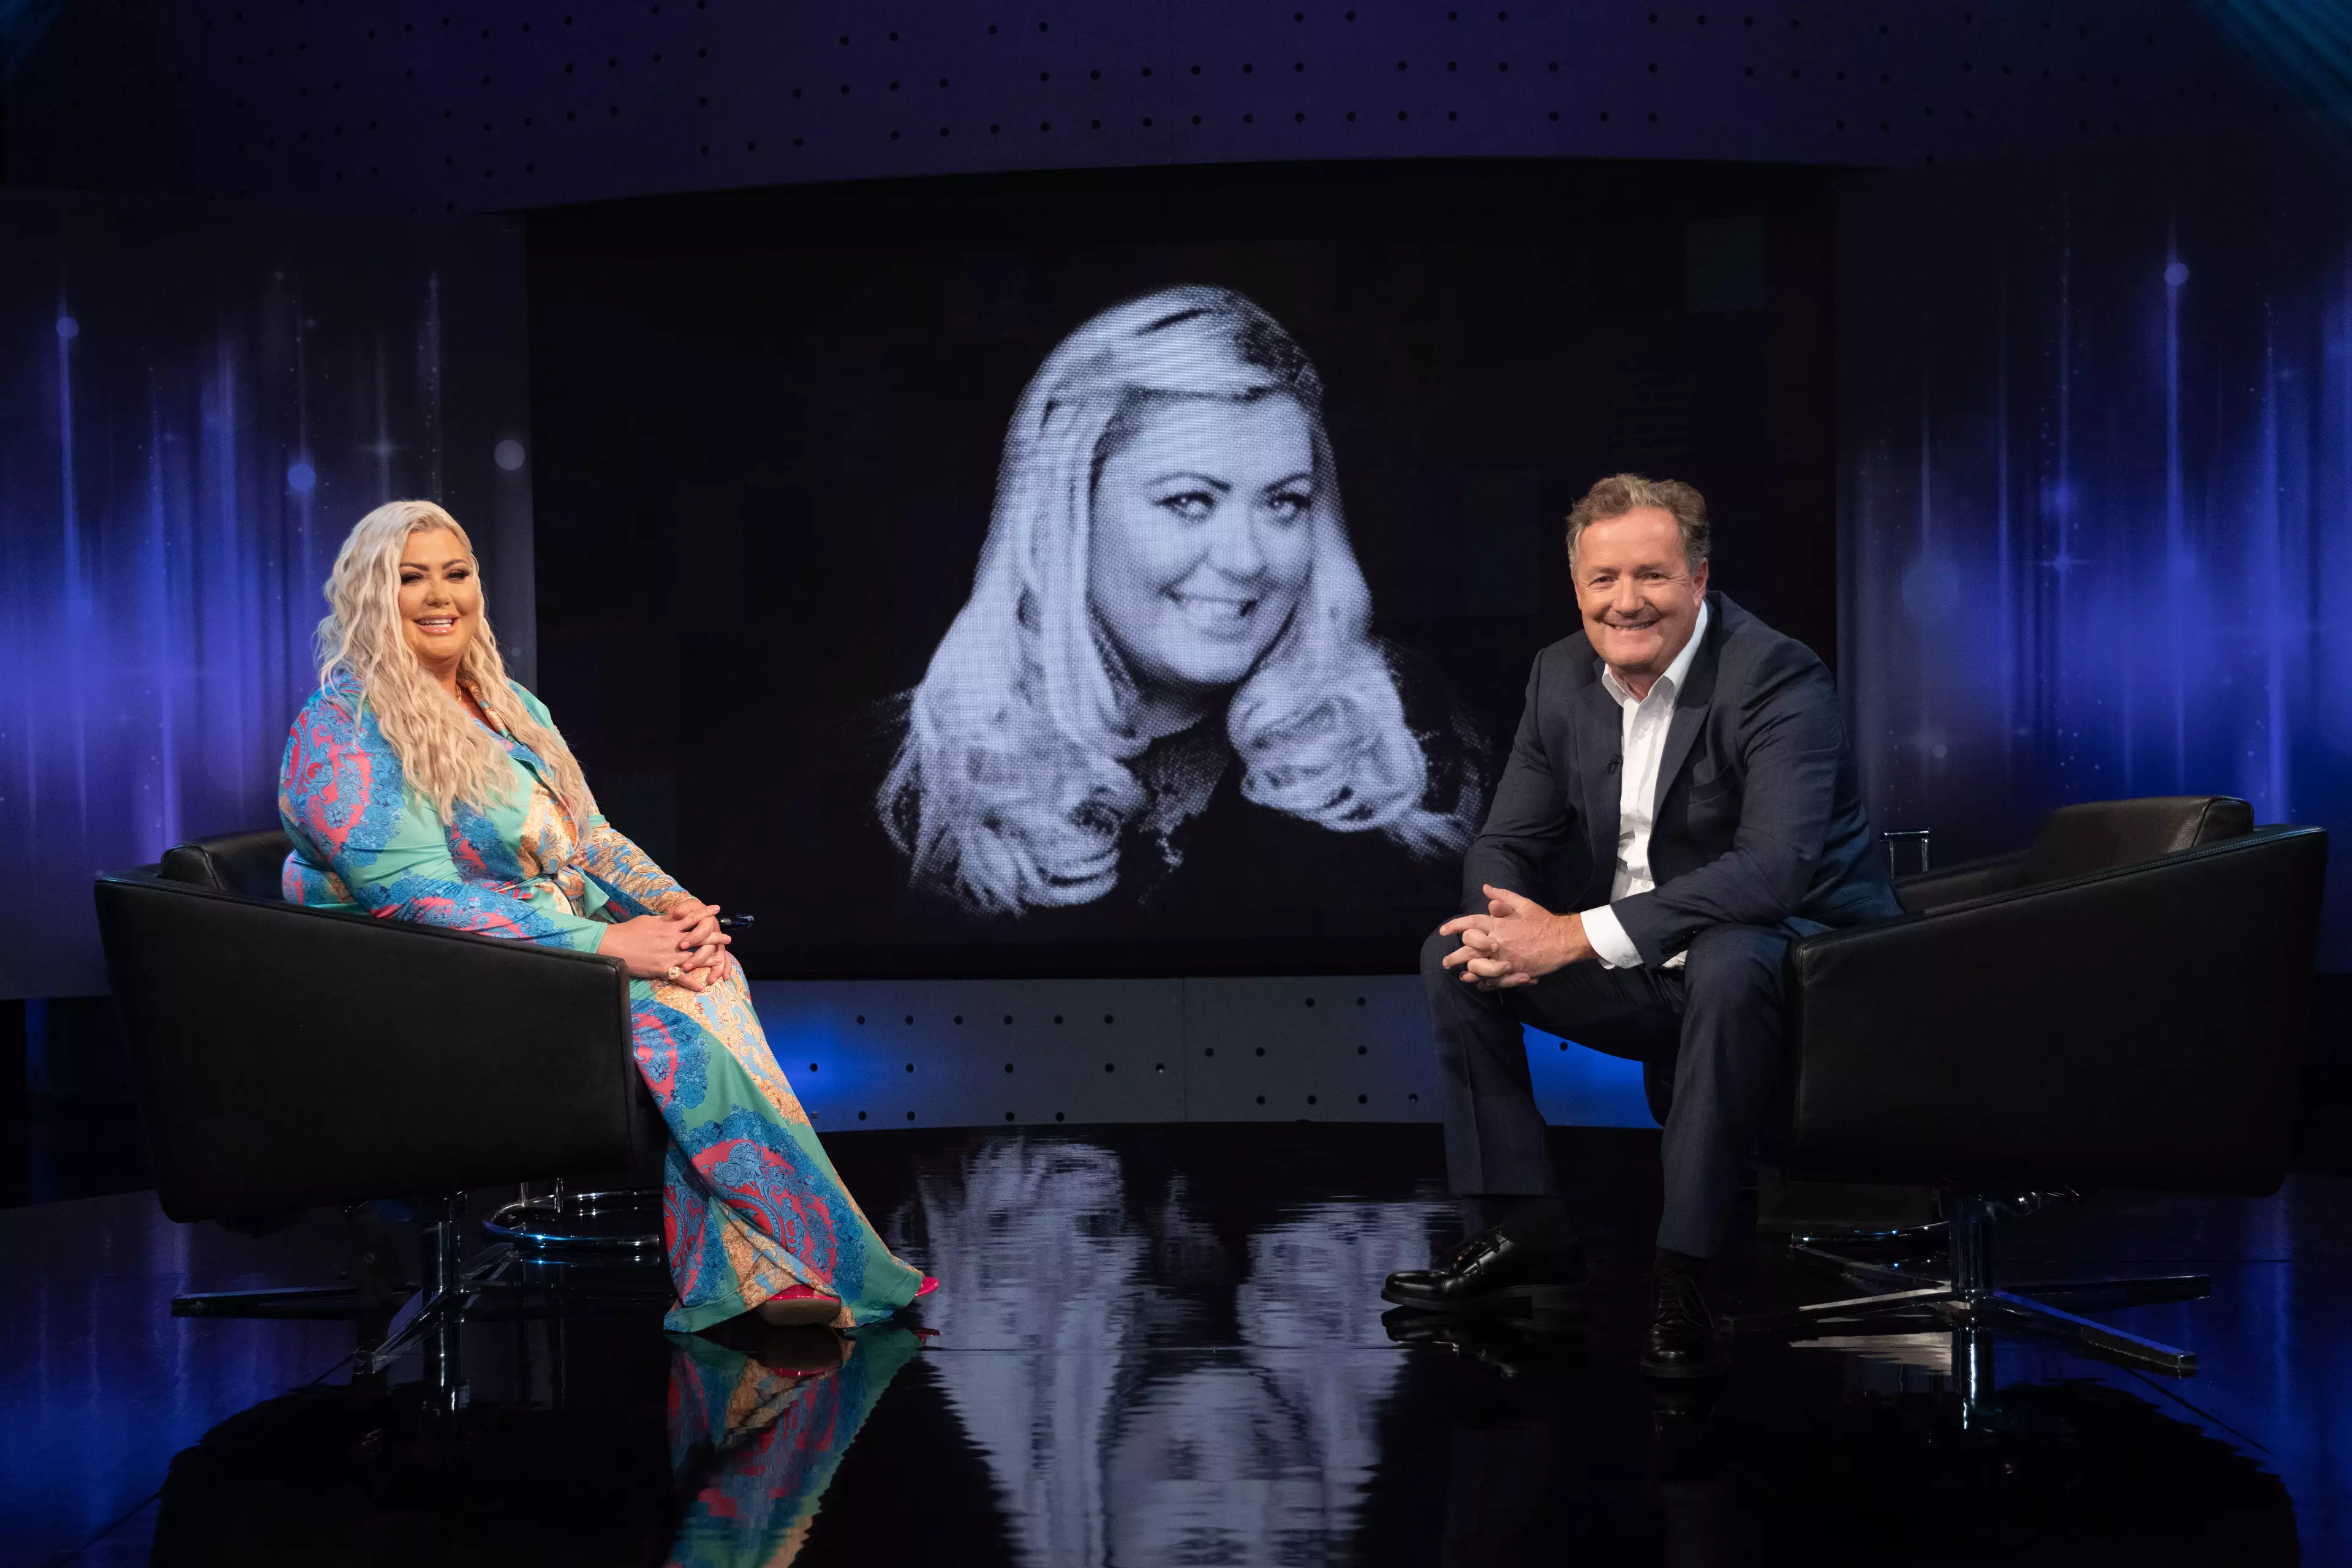 Gemma will appear on Piers Morgan's Life Stories (